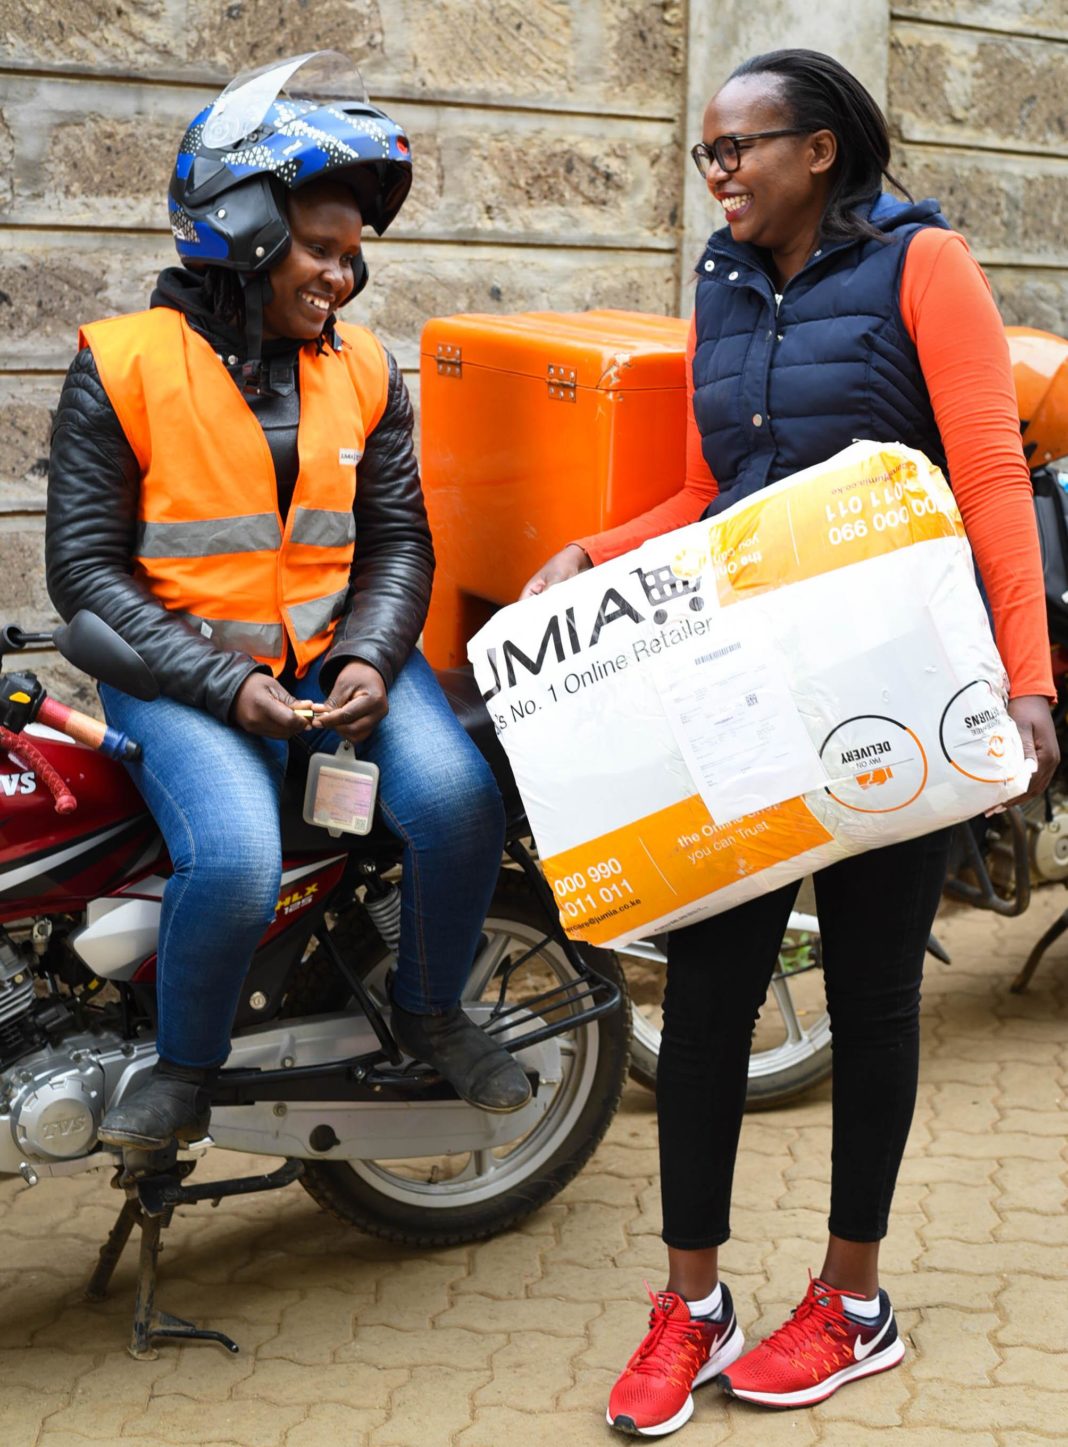 Jumia Kenya Chief Operations Officer, Christine Sogomo, chats with one of the Delivery Agents, Lillian Muyonga, during a delivery session at Adams - Bizna